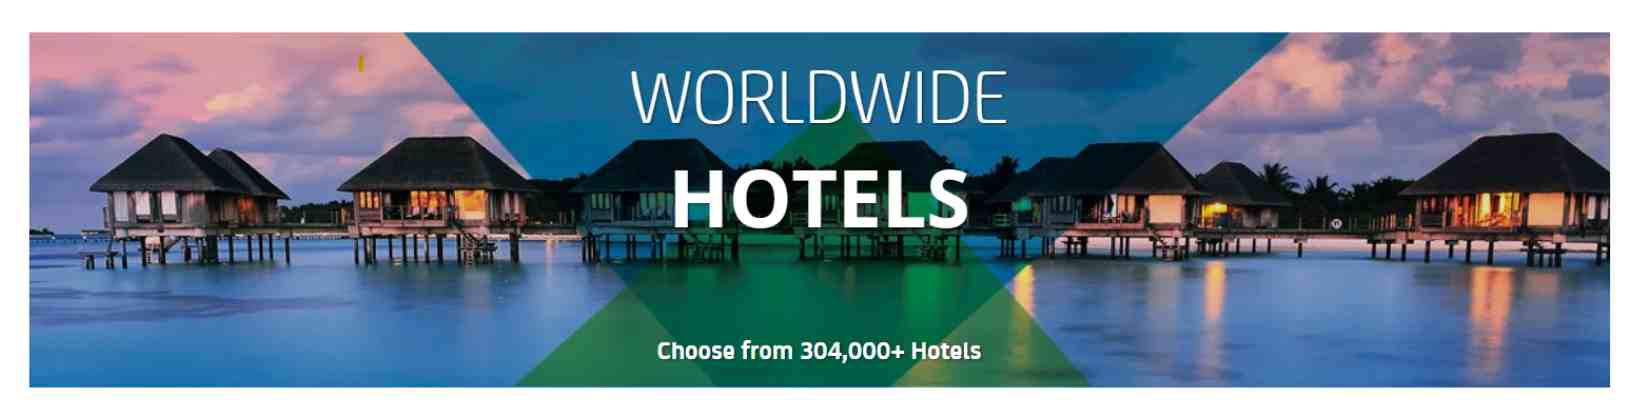 Dnata Travel discount on hotel bookings